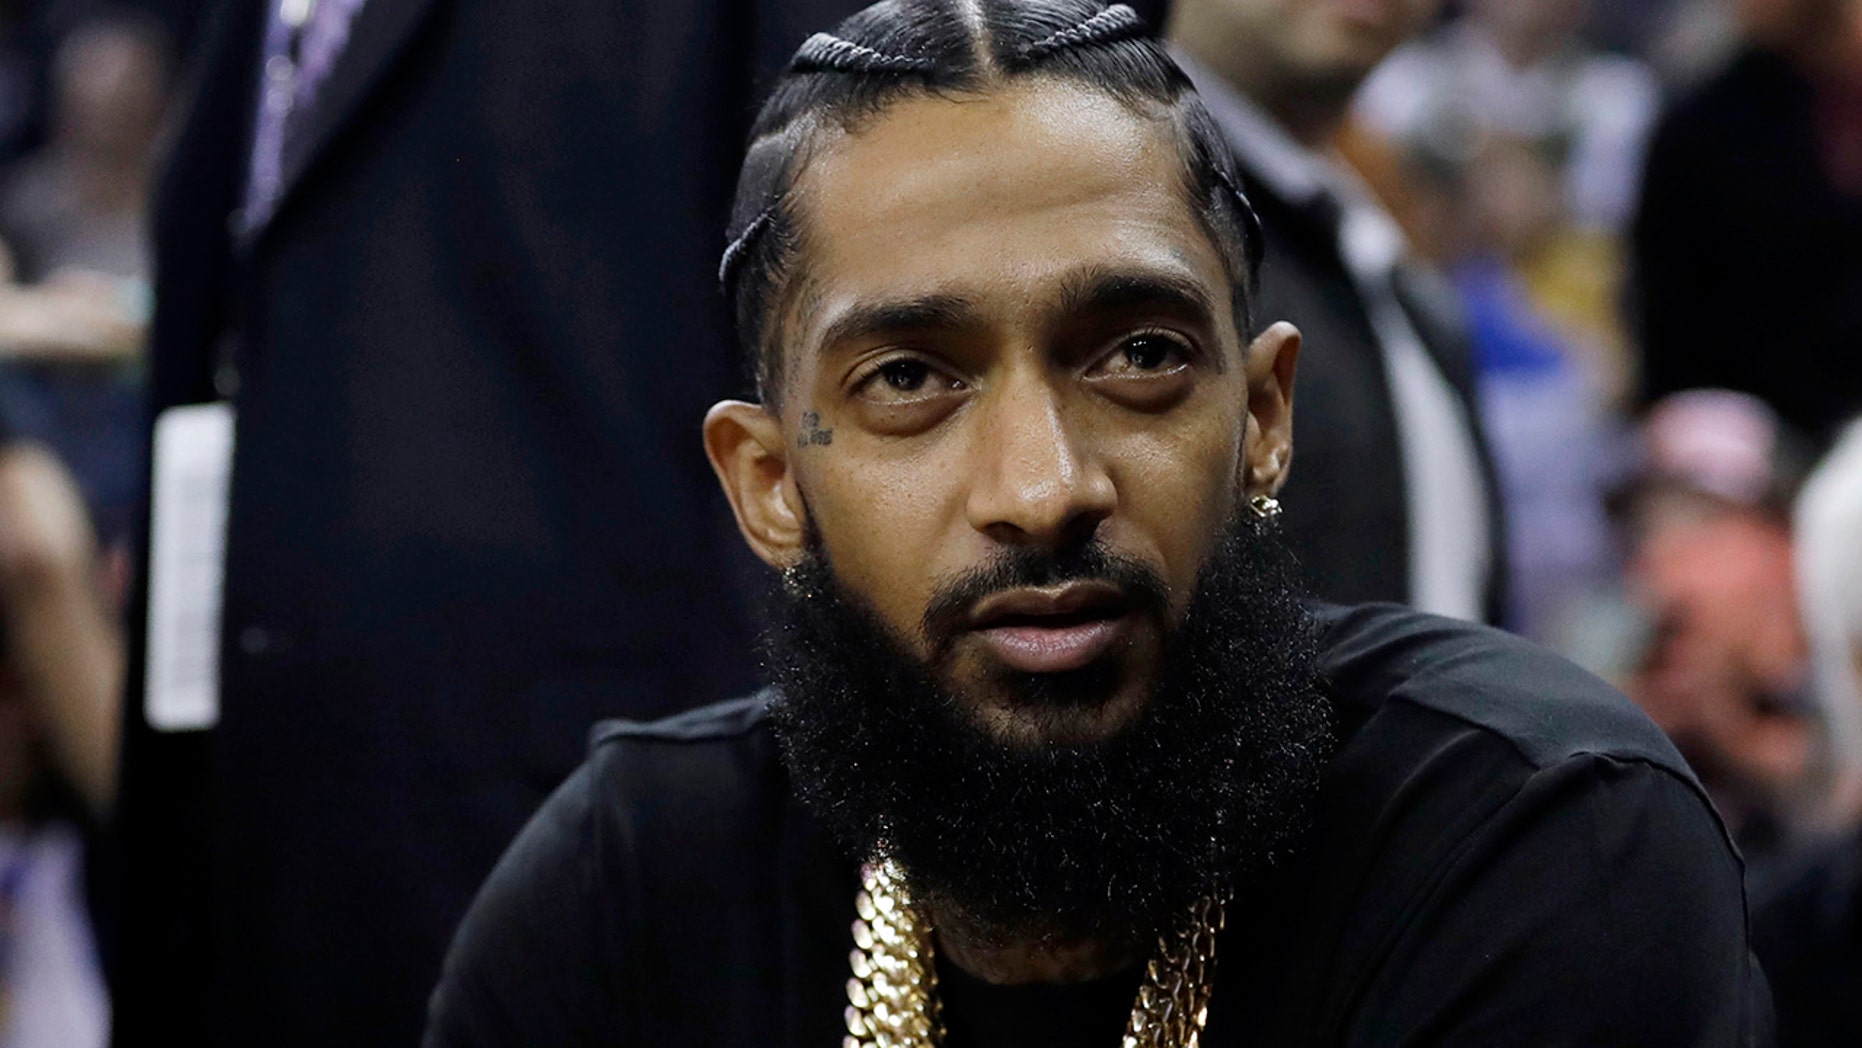 DOSSIER - In this archival photo of March 29, 2018, rapper Nipsey Hussle observes an NBA basketball match between the Golden State Warriors and the Milwaukee Bucks in Oakland, California. Grammy-nominated and highly respected rapper Nipsey Hussle was killed and shot dead Los Angeles Mayor Eric Garcetti said Sunday, March 31, 2019 that he was 33 years old, in front of his clothing store in Toronto. Los Angeles. (AP Photo / Marcio Jose Sanchez, File)